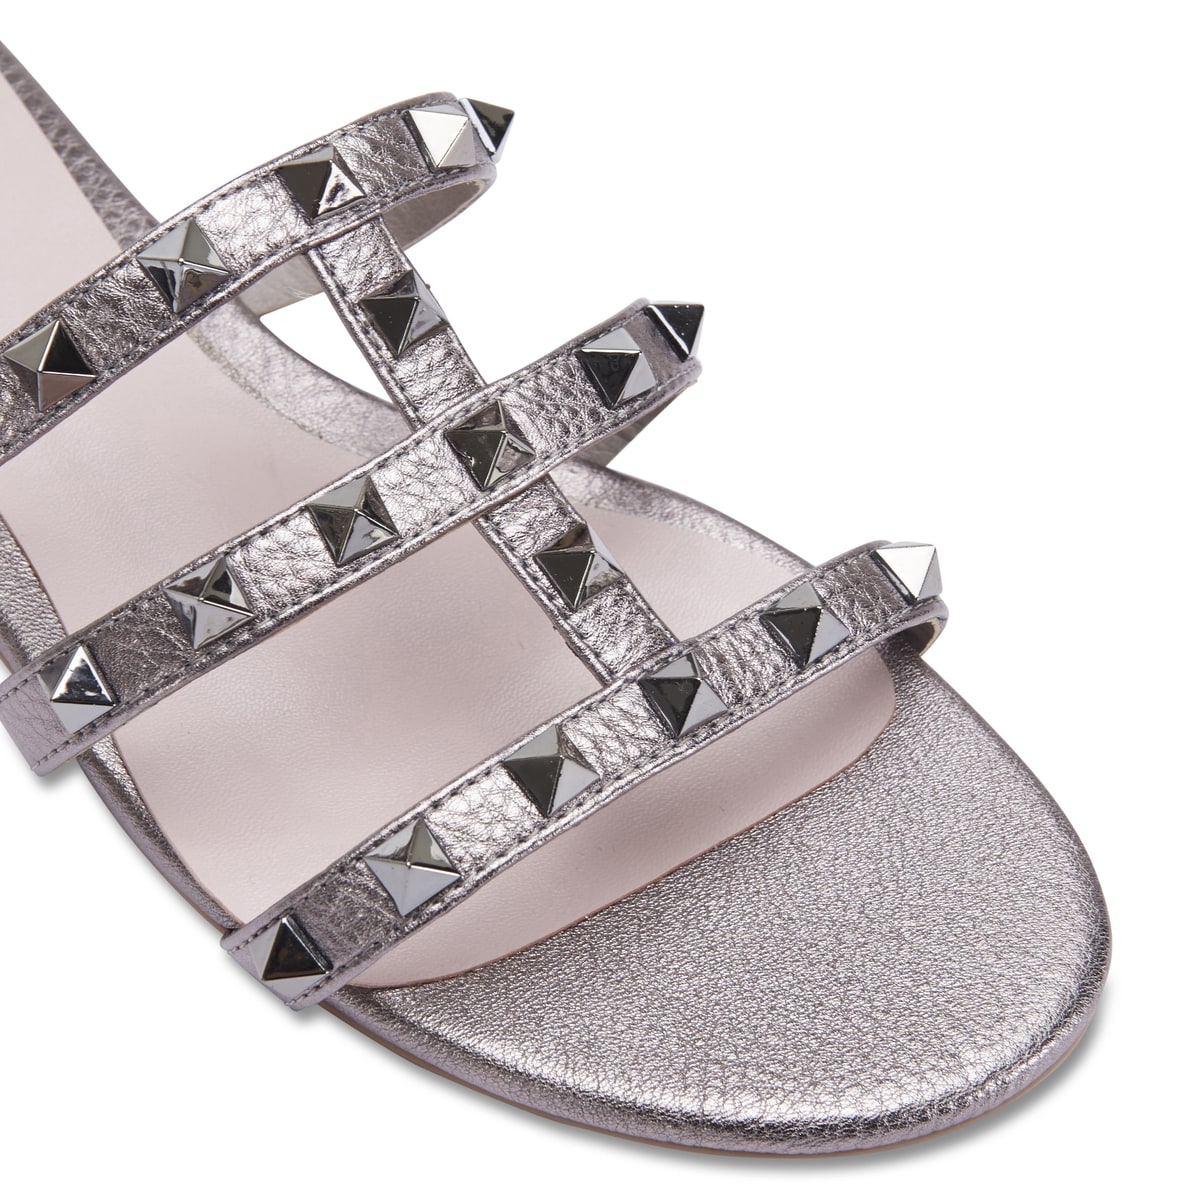 Spain Slide in Pewter Leather